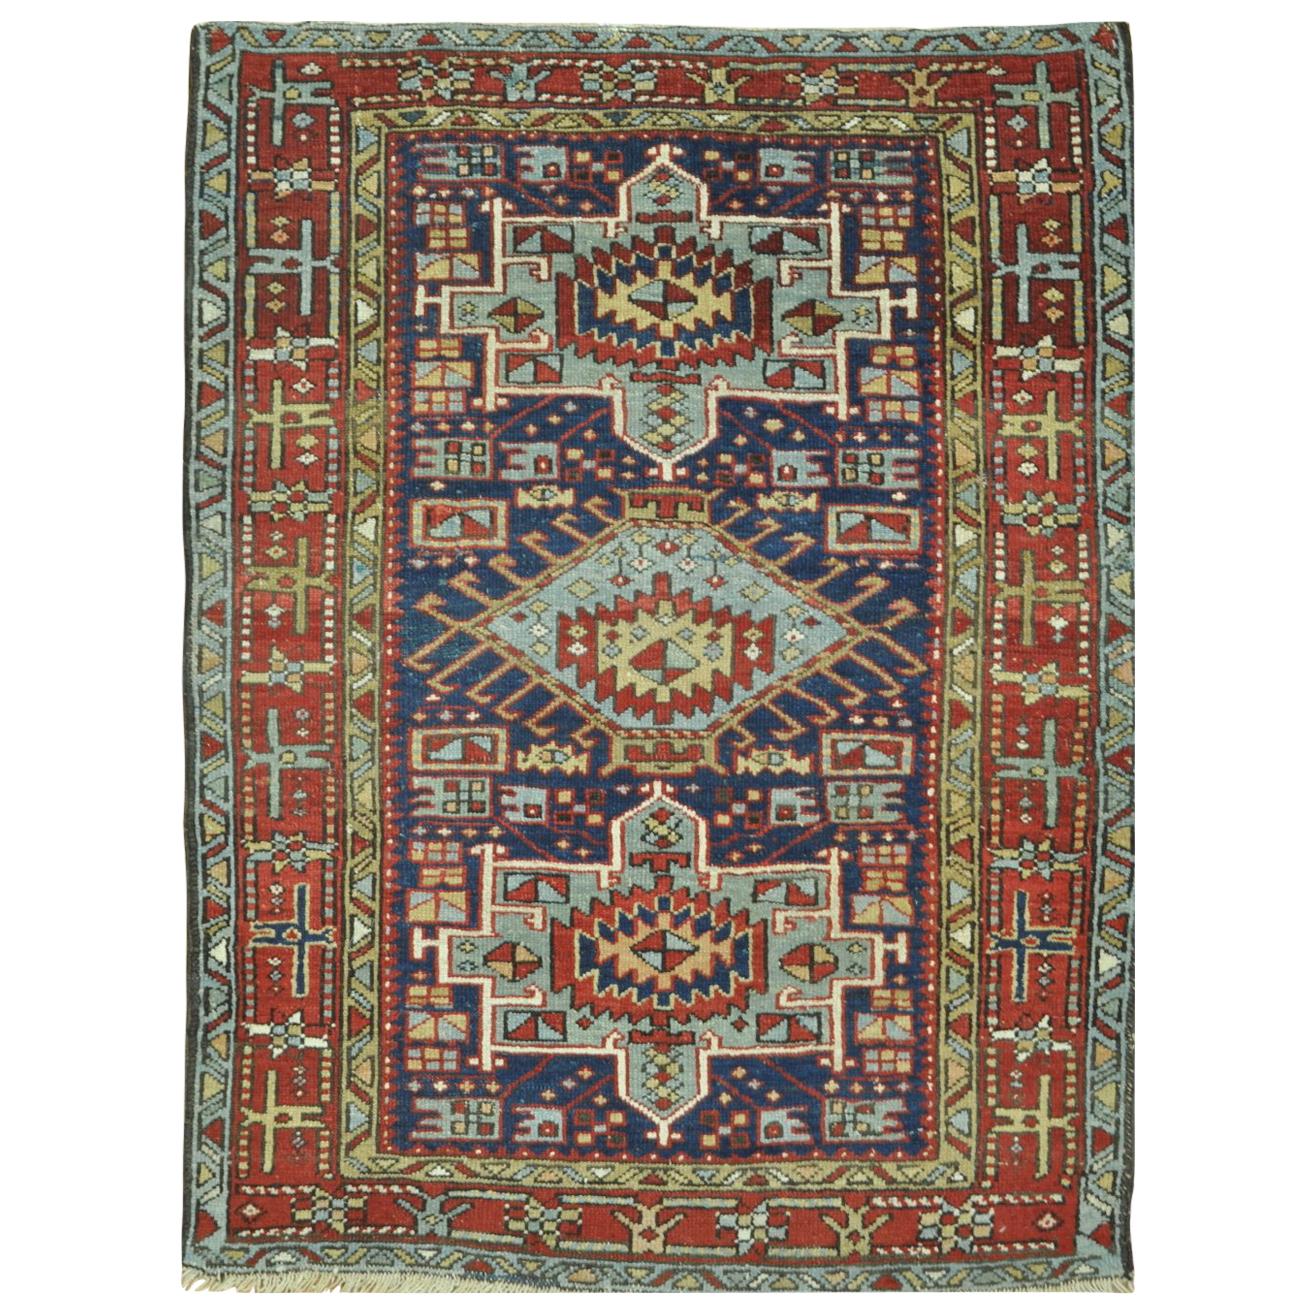 Small Antique Hand-Knotted Wool Persian Heriz Rug